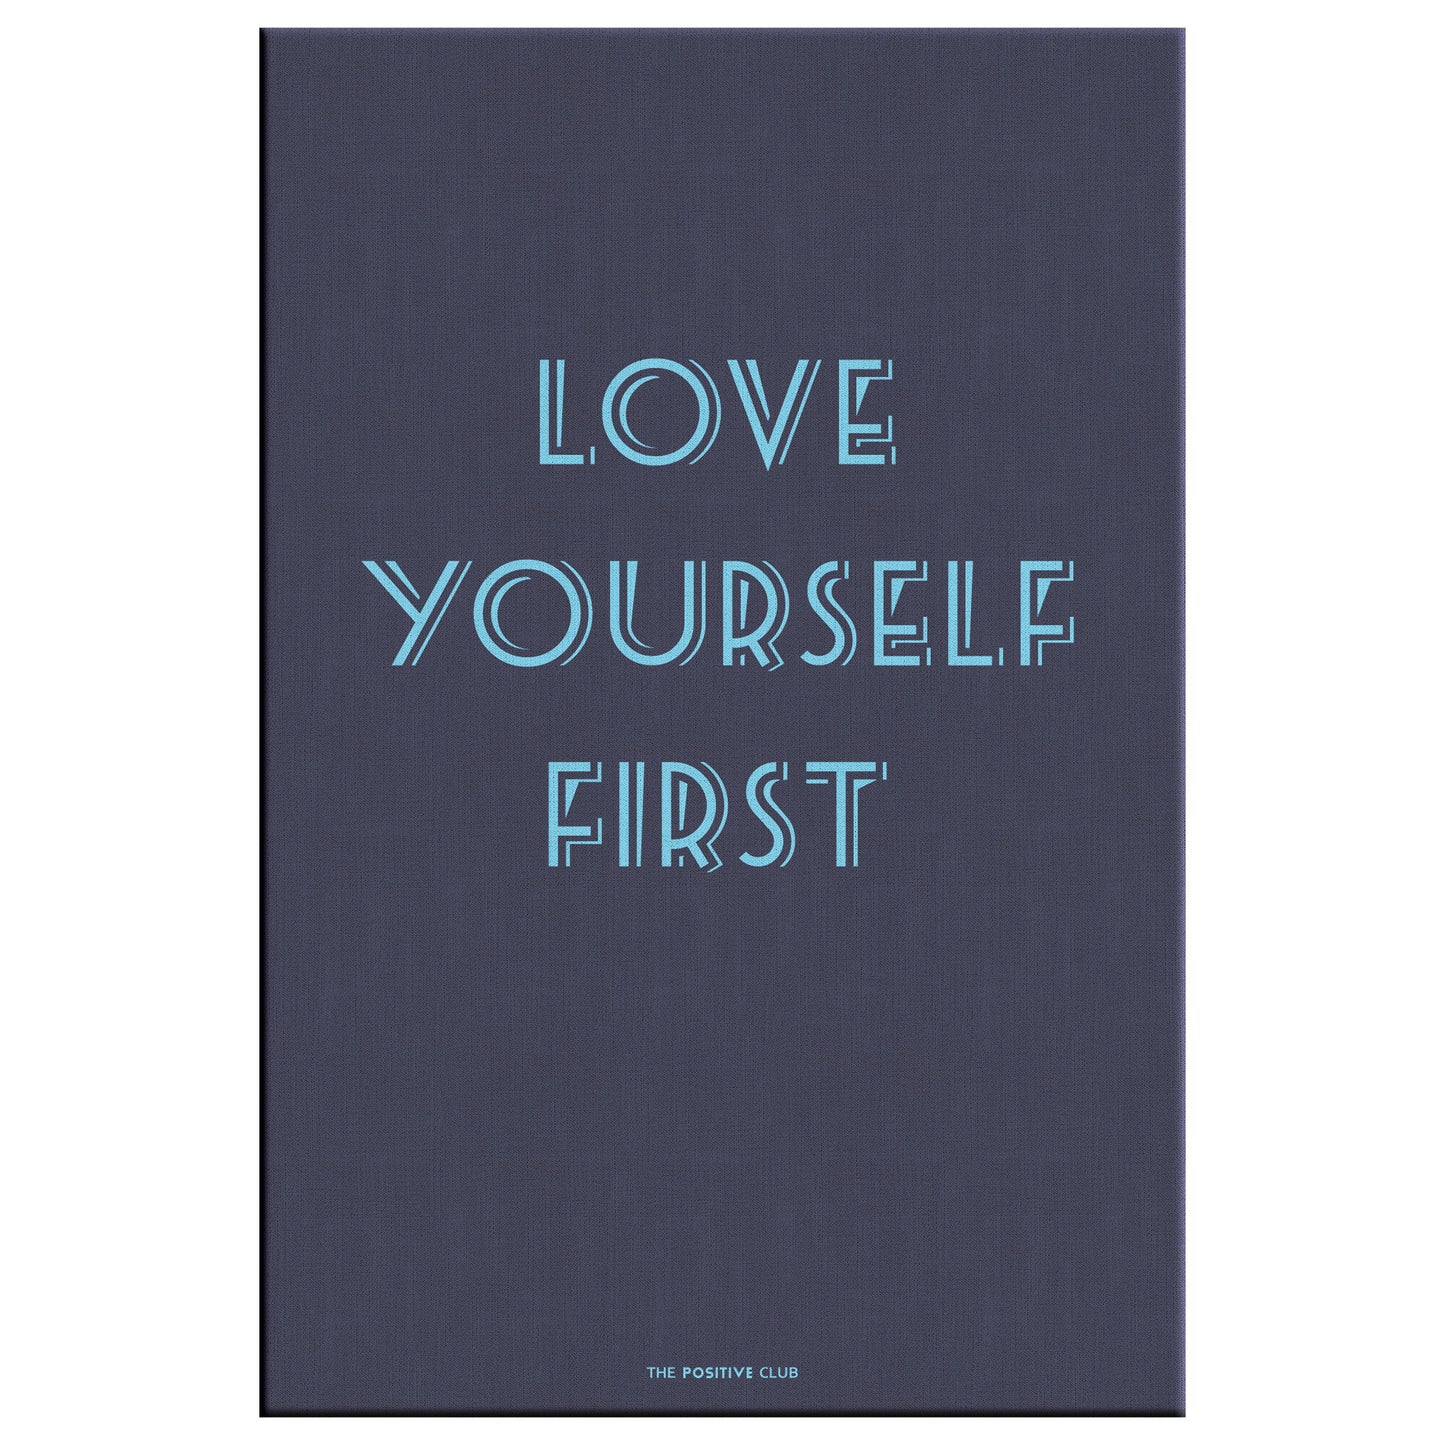 LOVE YOURSELF FIRST